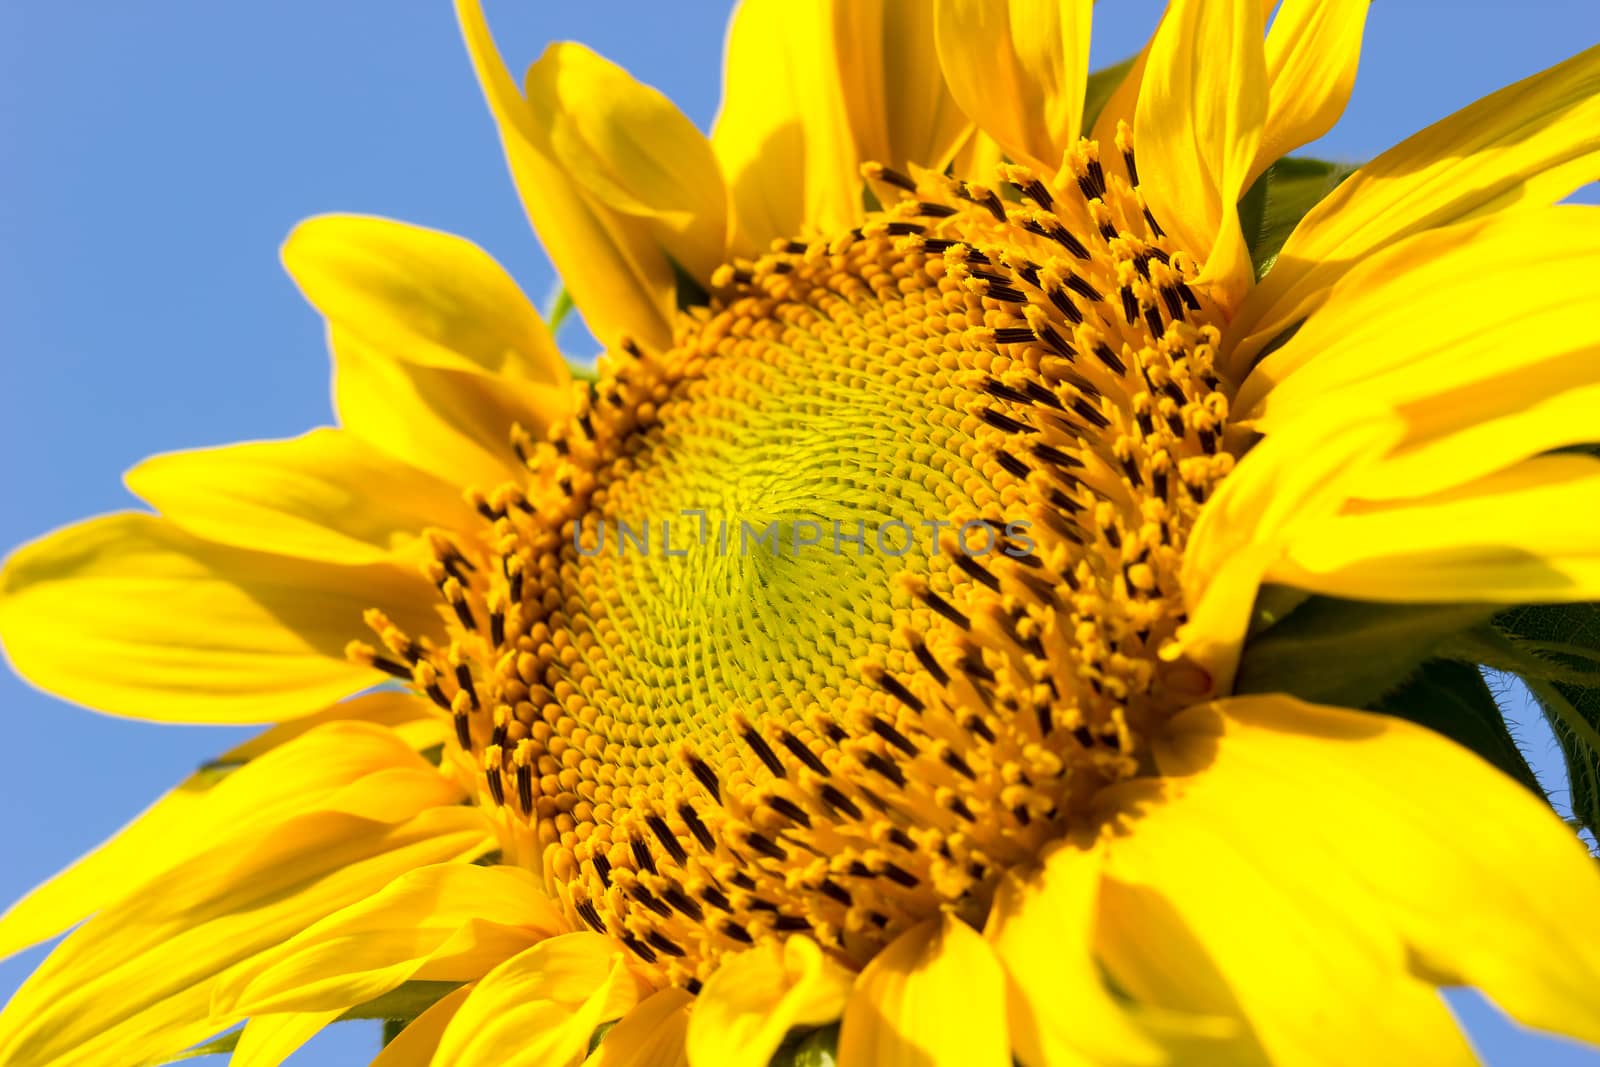 Sunflower in the hot sunlight on blue sky background. Suitable for backgrounds, articles about nature.